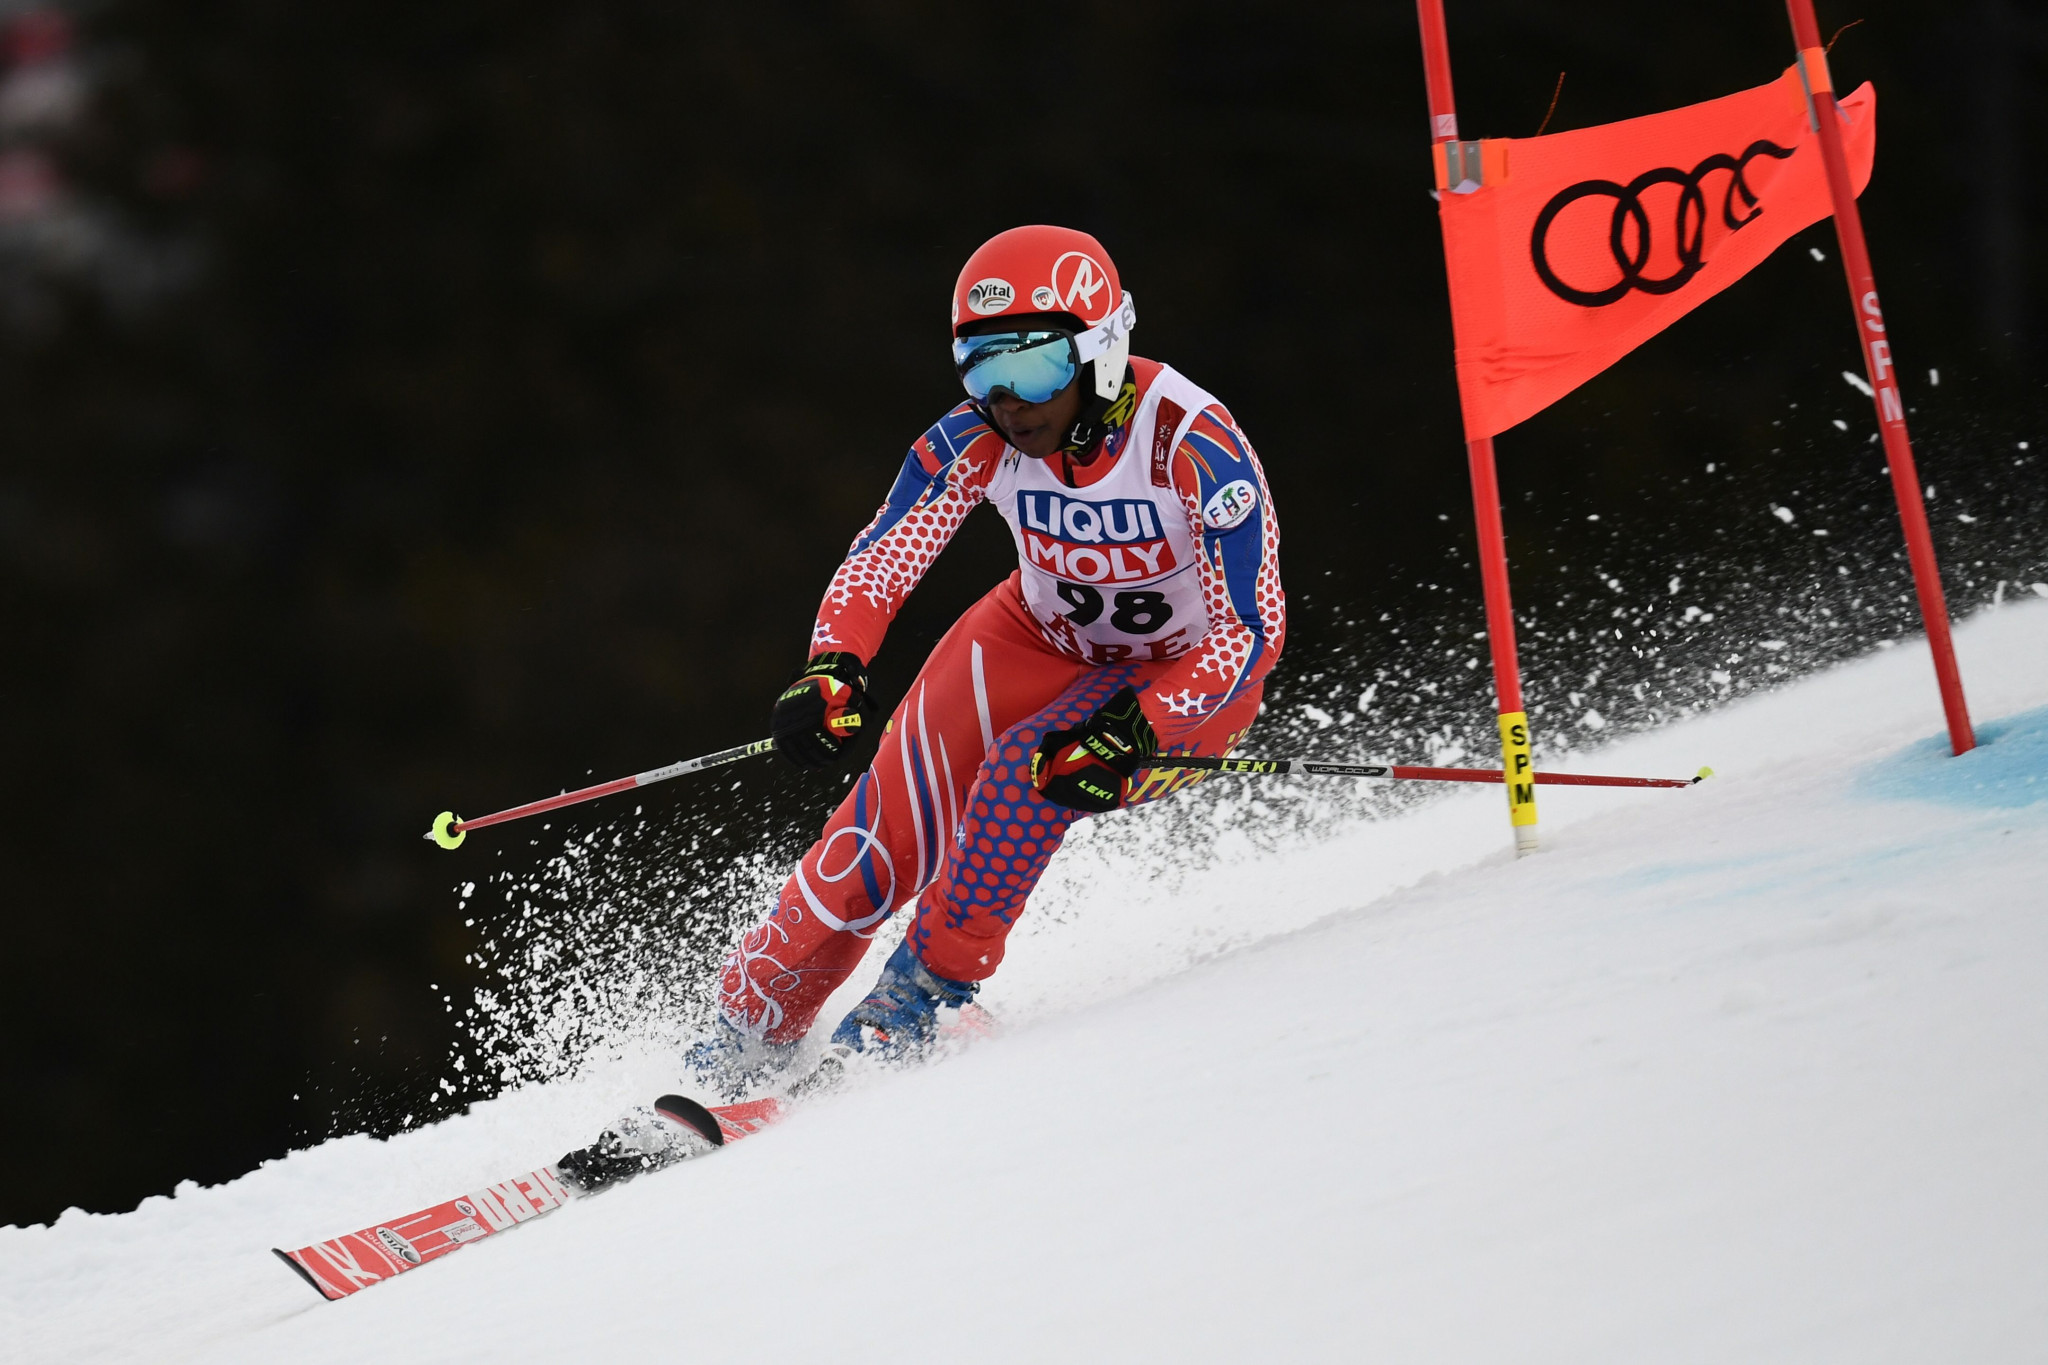 Celine Marti competed in the women's slalom event at February’s FIS Alpine World Ski Championships in Åre in Sweden, finishing 52nd ©Getty Images